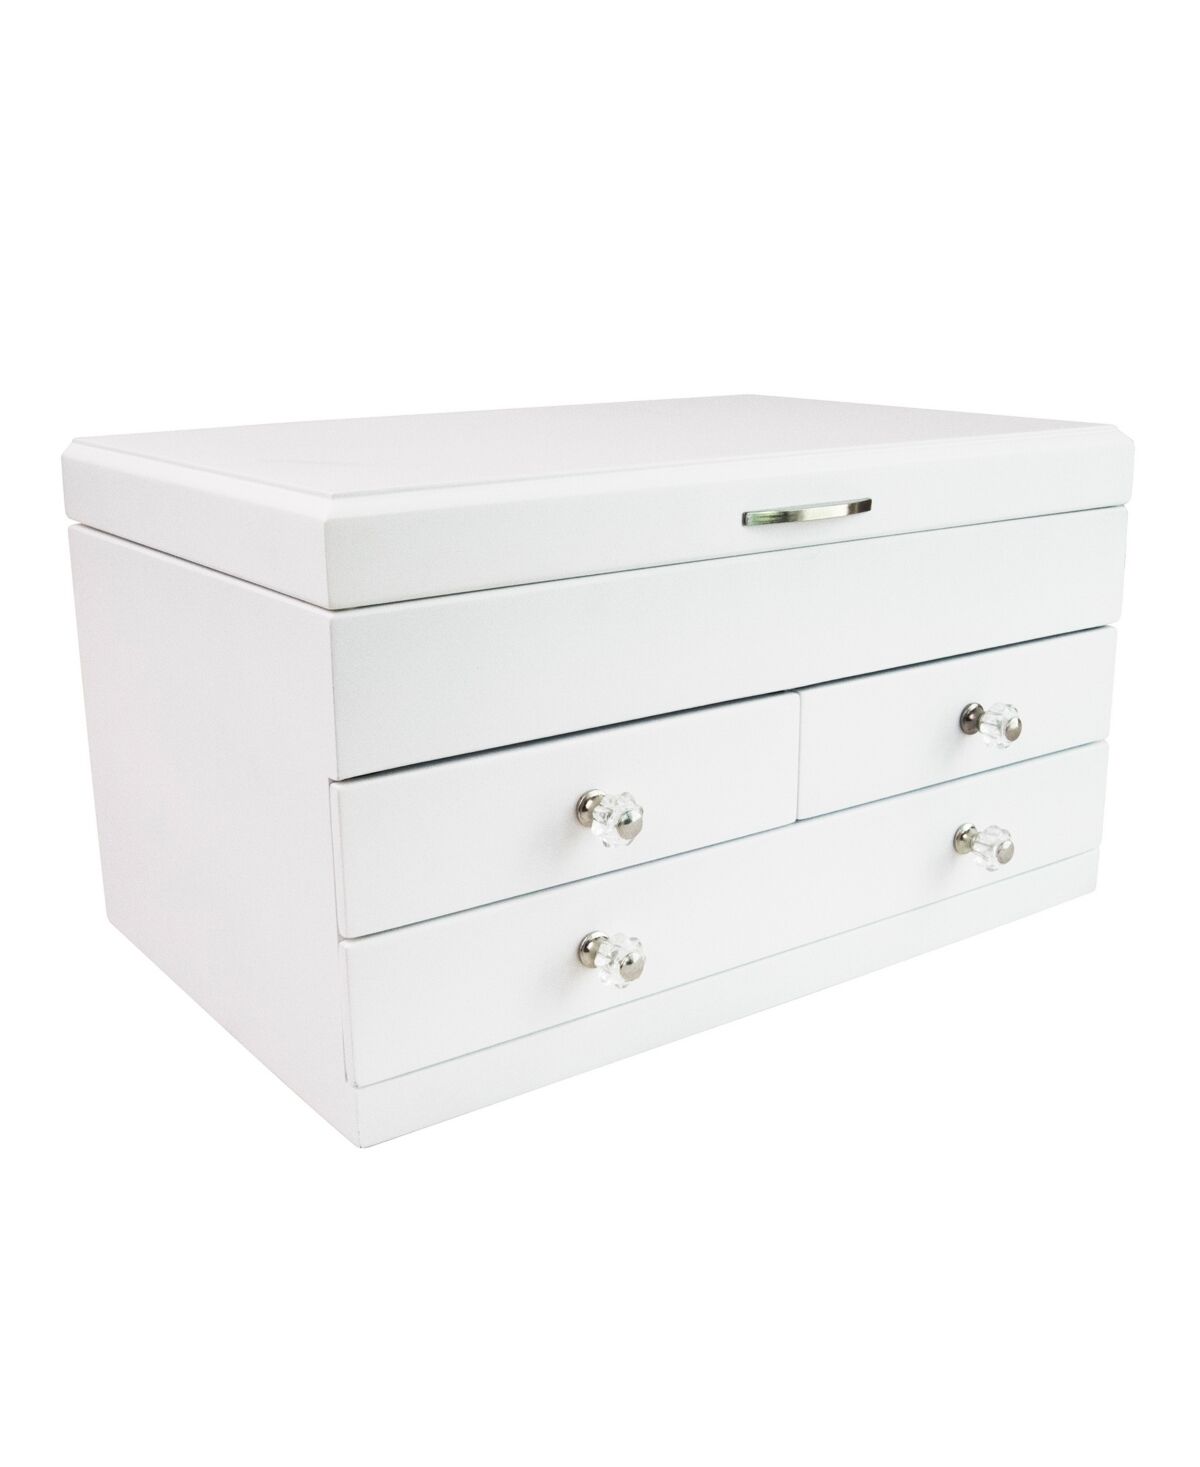 Mele & Co Fairhaven Wooden Jewelry Box in Finish - White